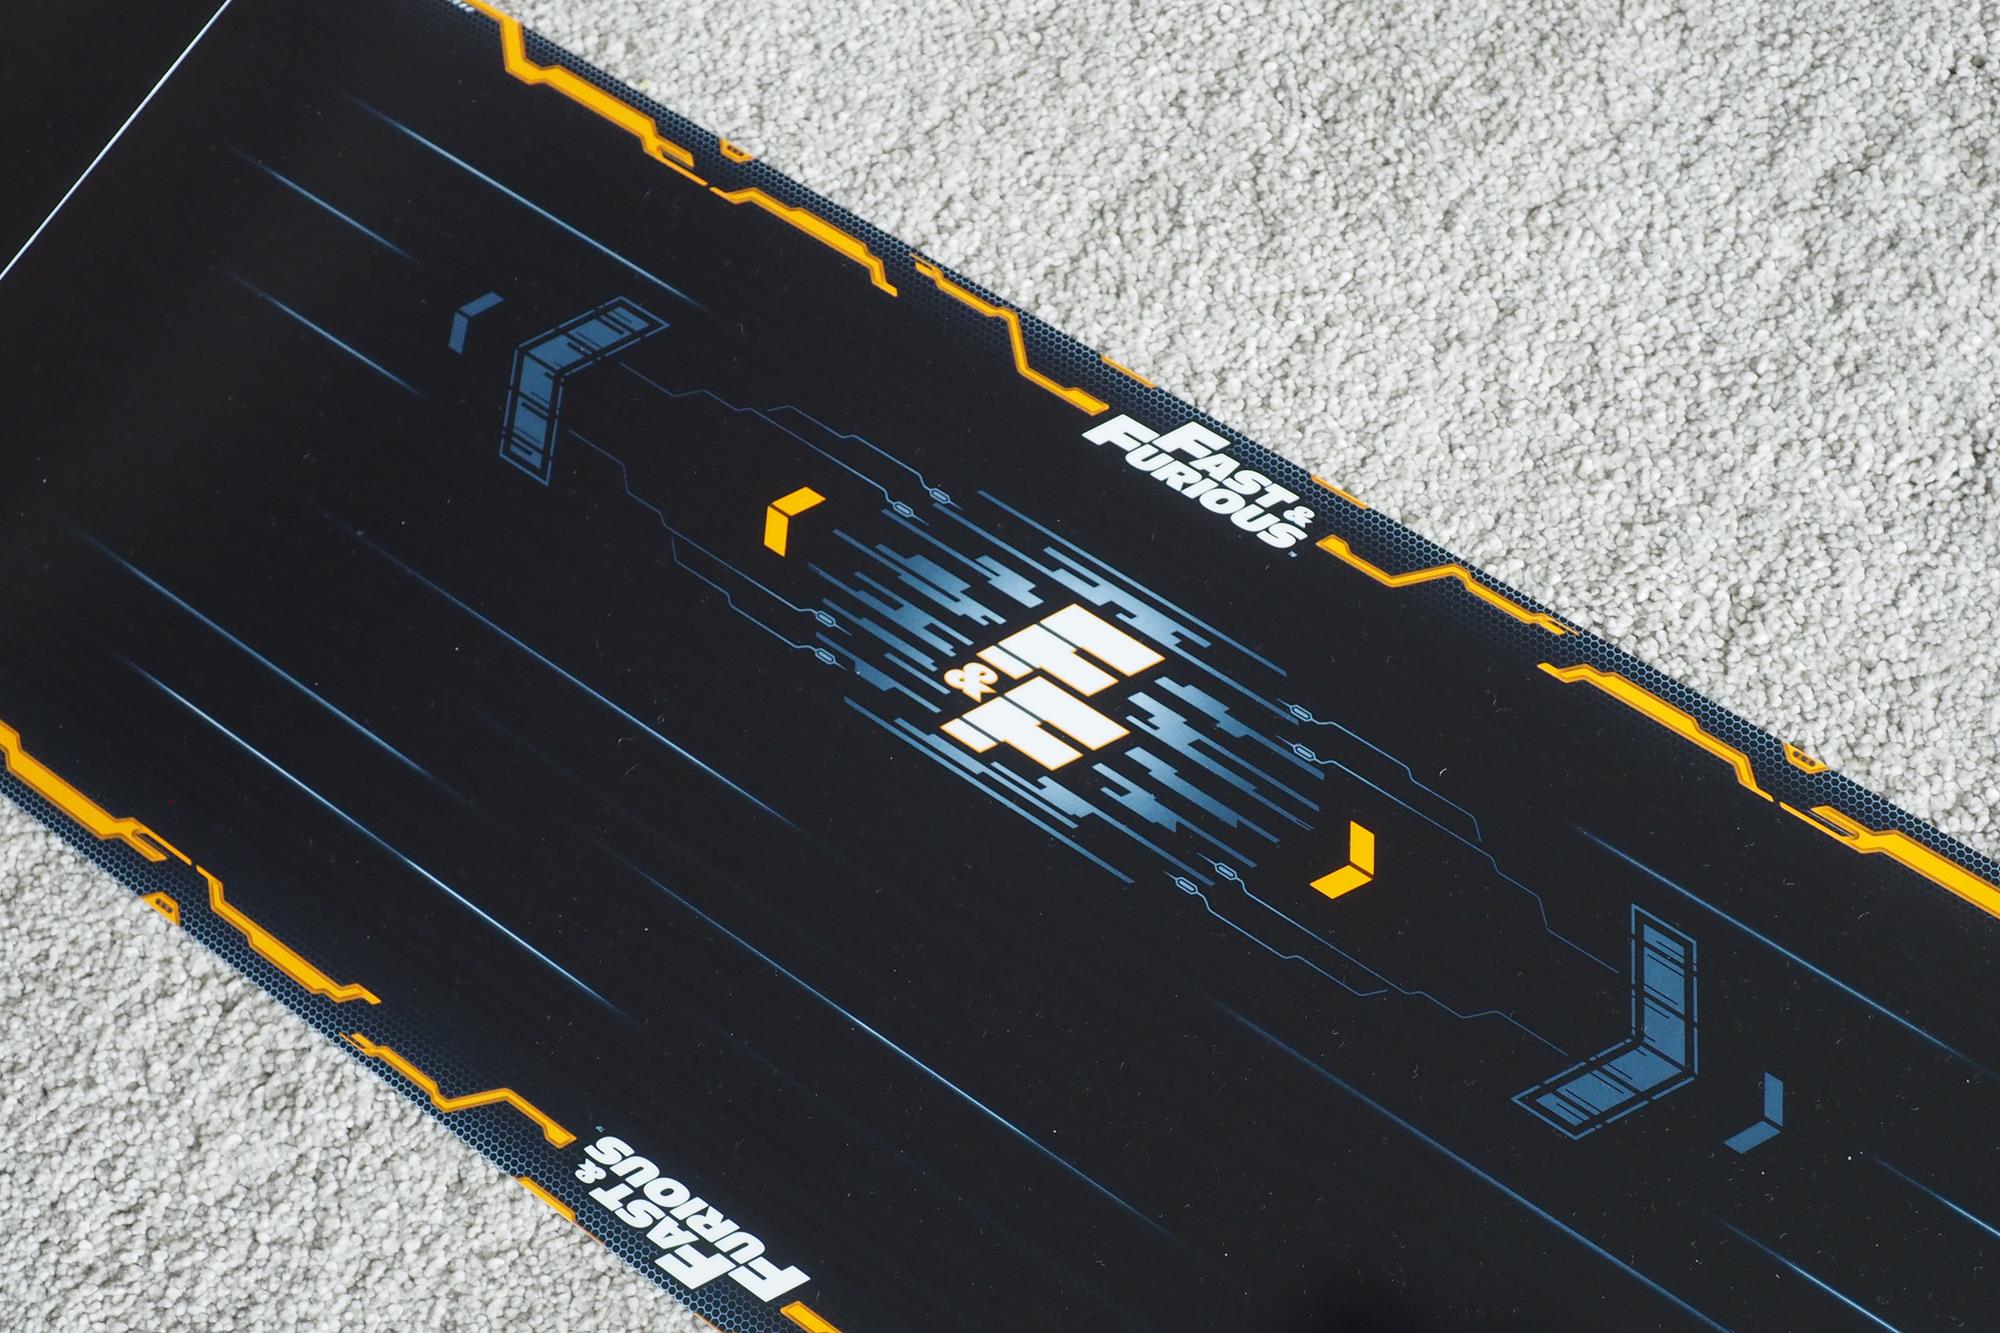 Part of Anki Overdrive track with Fast & Furious branding